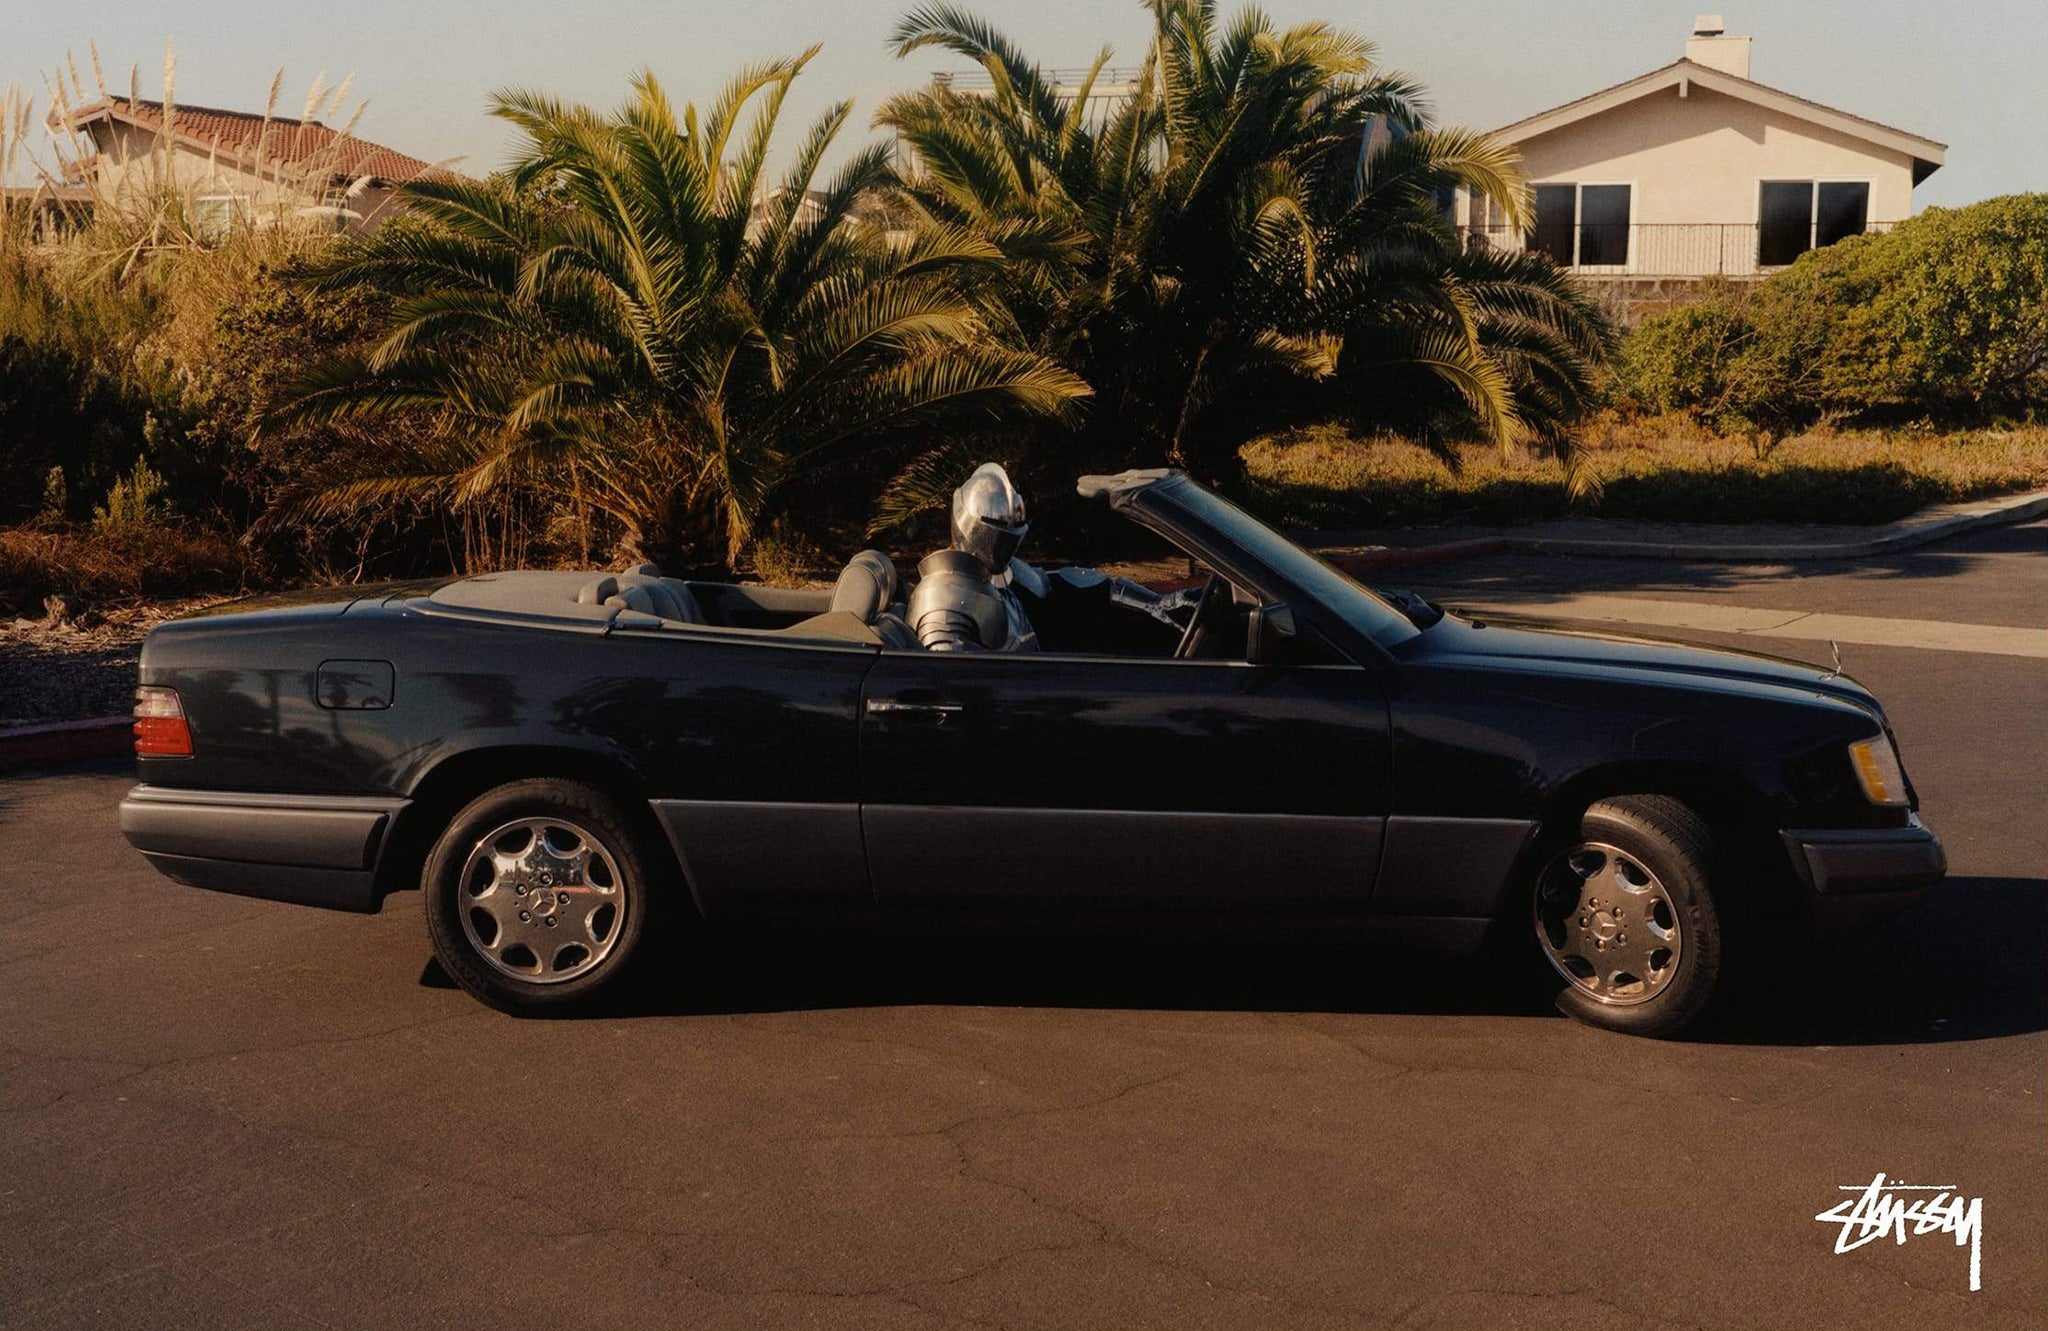 Person dressed in armor driving a black Mercedes SL parked in a cul-de-sac for Stussy photoshoot